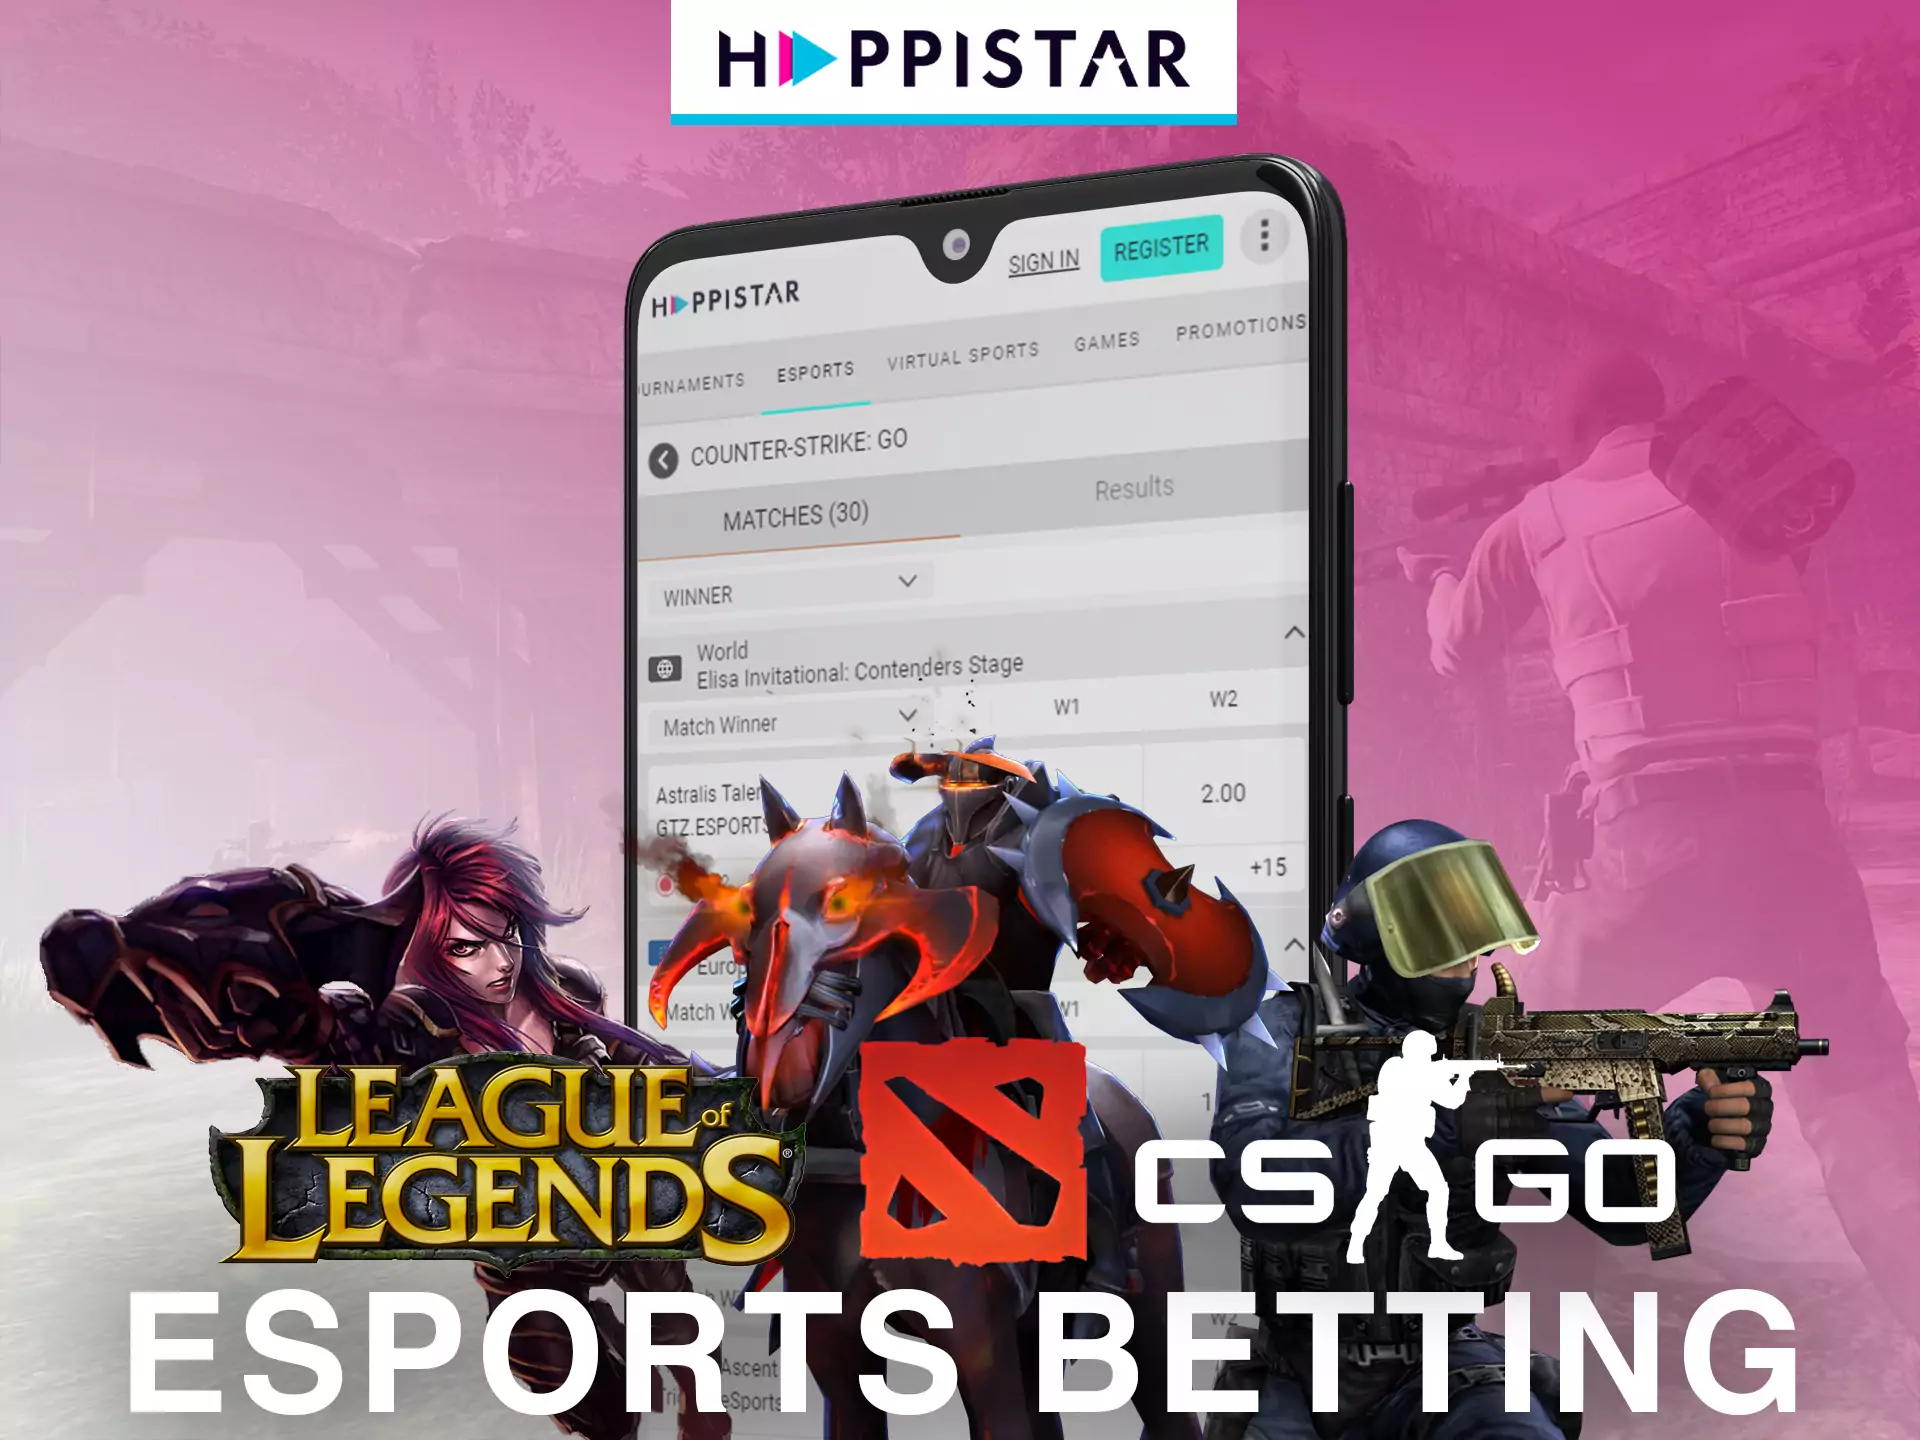 Happistar sportsbook includes a list of esports events as well.